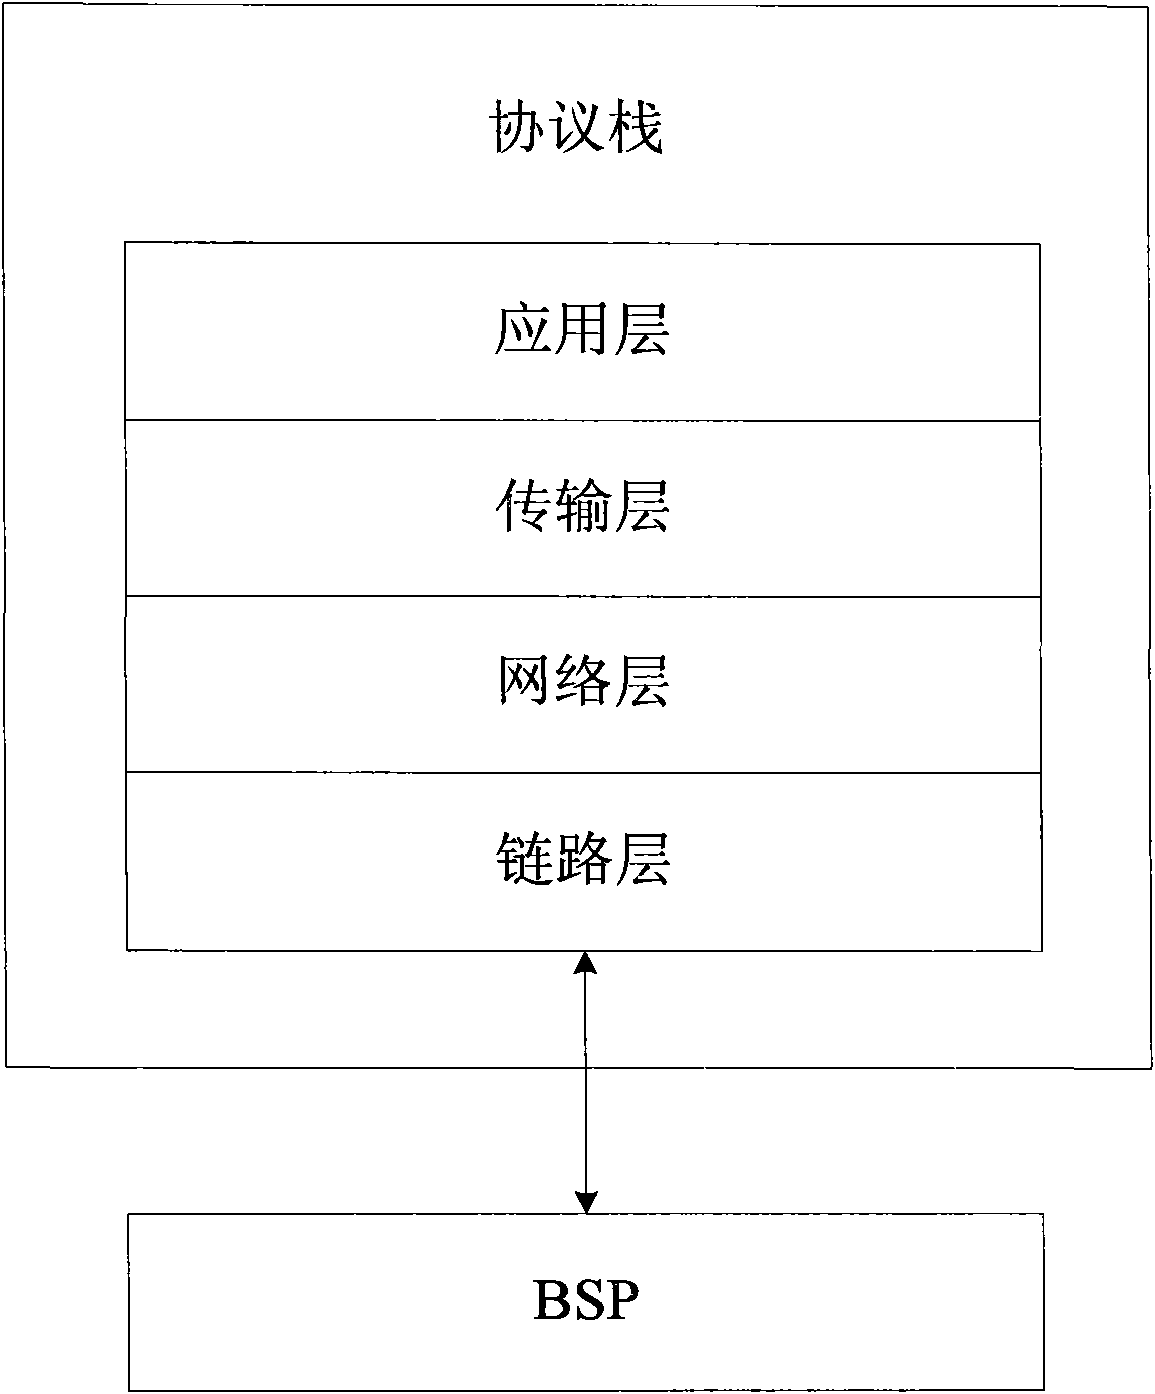 Method and system for monitoring state and controlling resetting of base station based on protocol stack